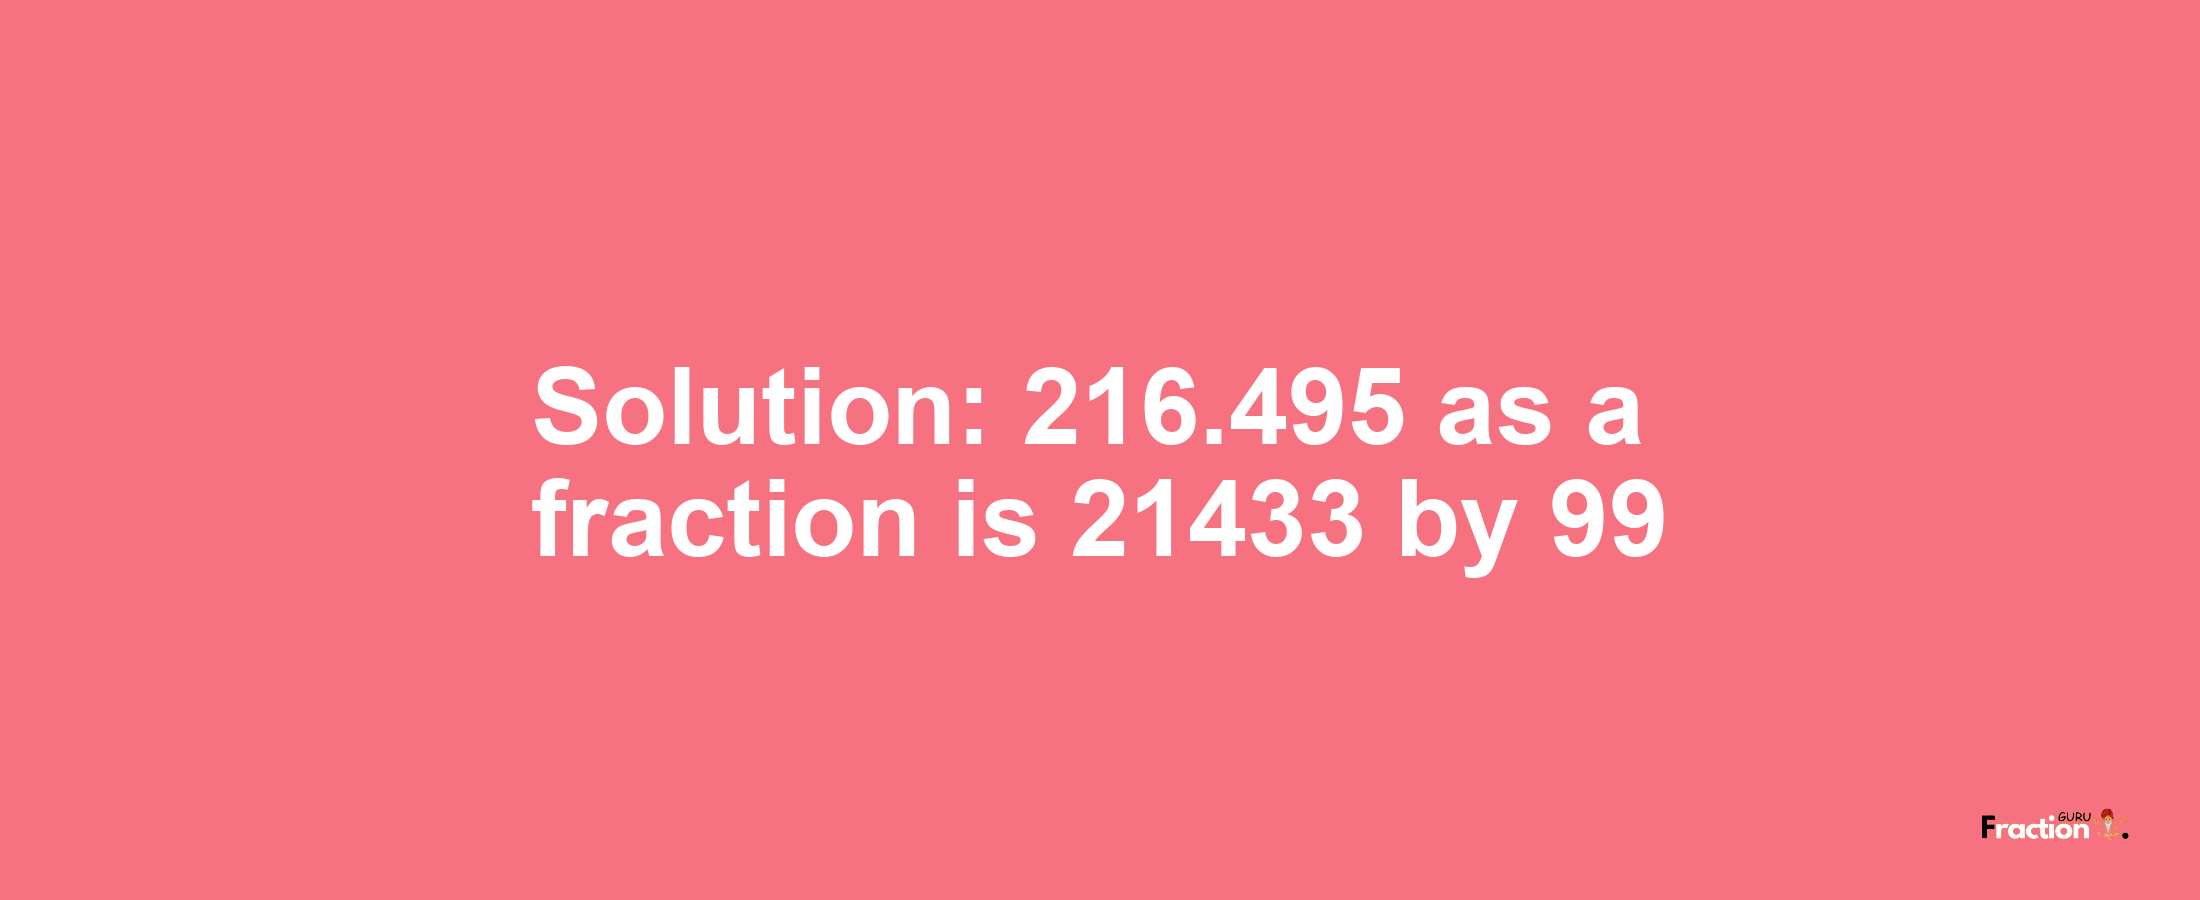 Solution:216.495 as a fraction is 21433/99